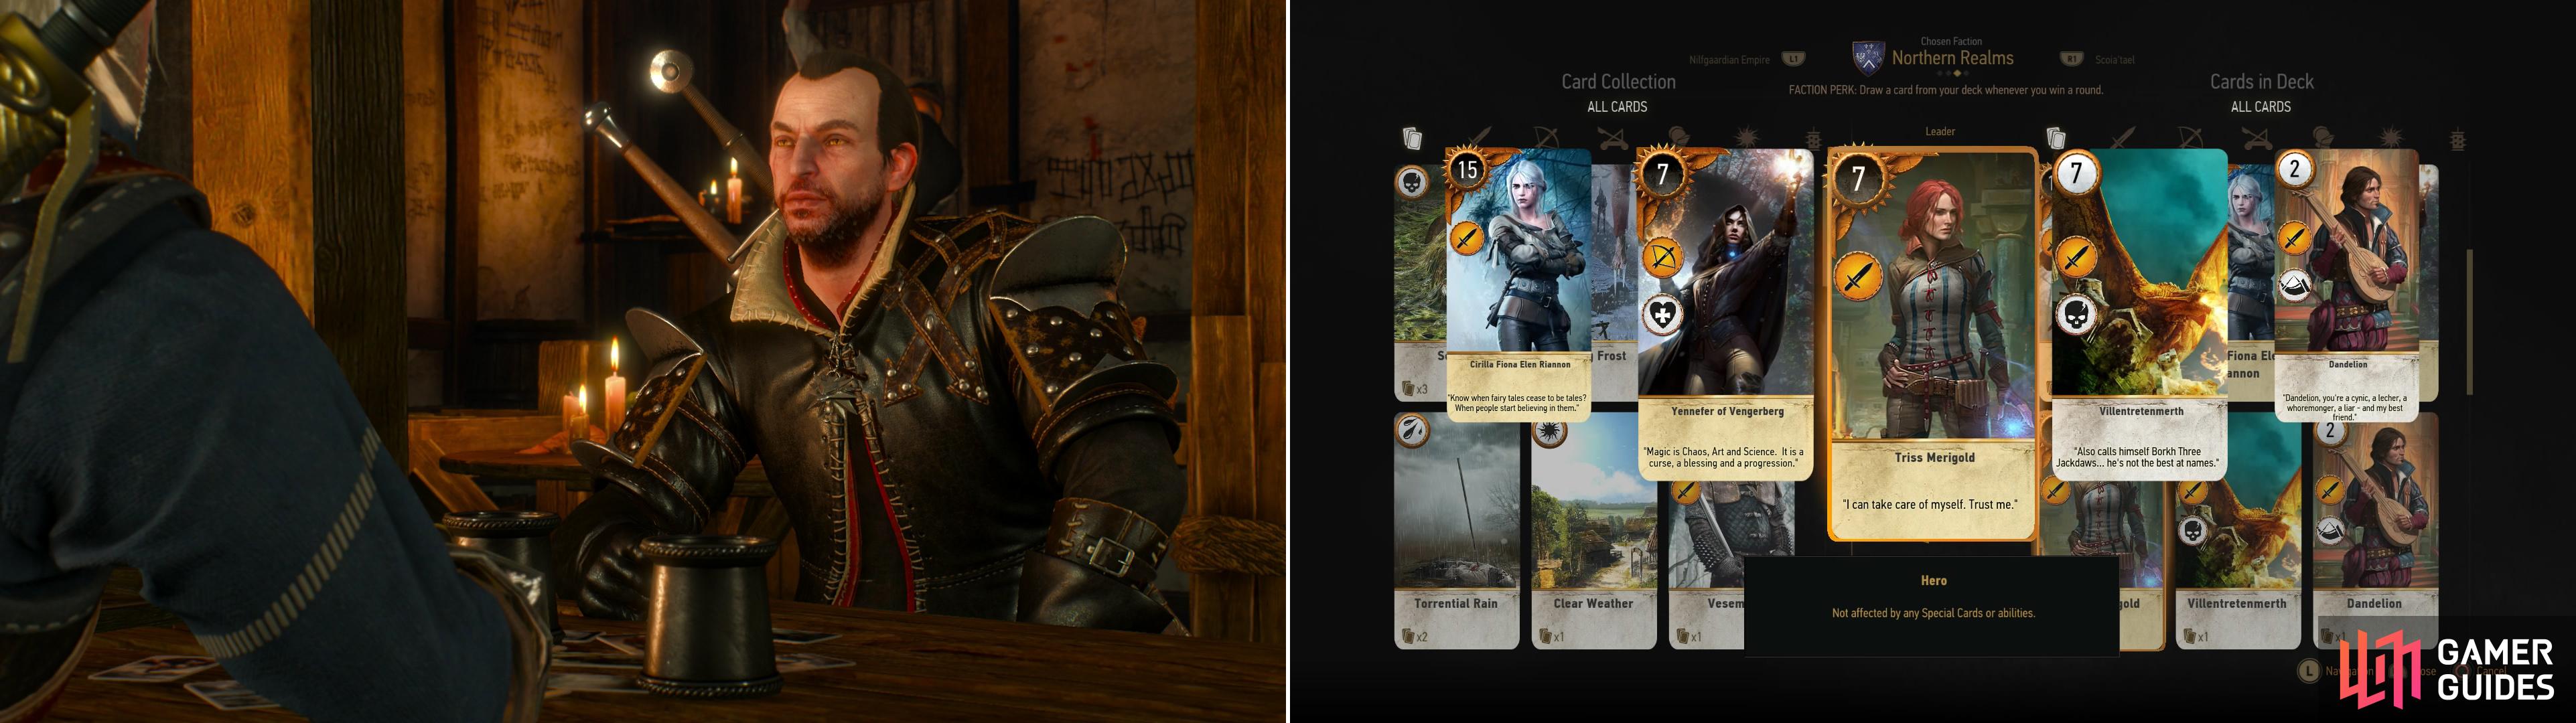 Your old friend Lambert can be played after helping him out in Skellige (left). If you win you’ll obtain the Triss Merigold card (right).